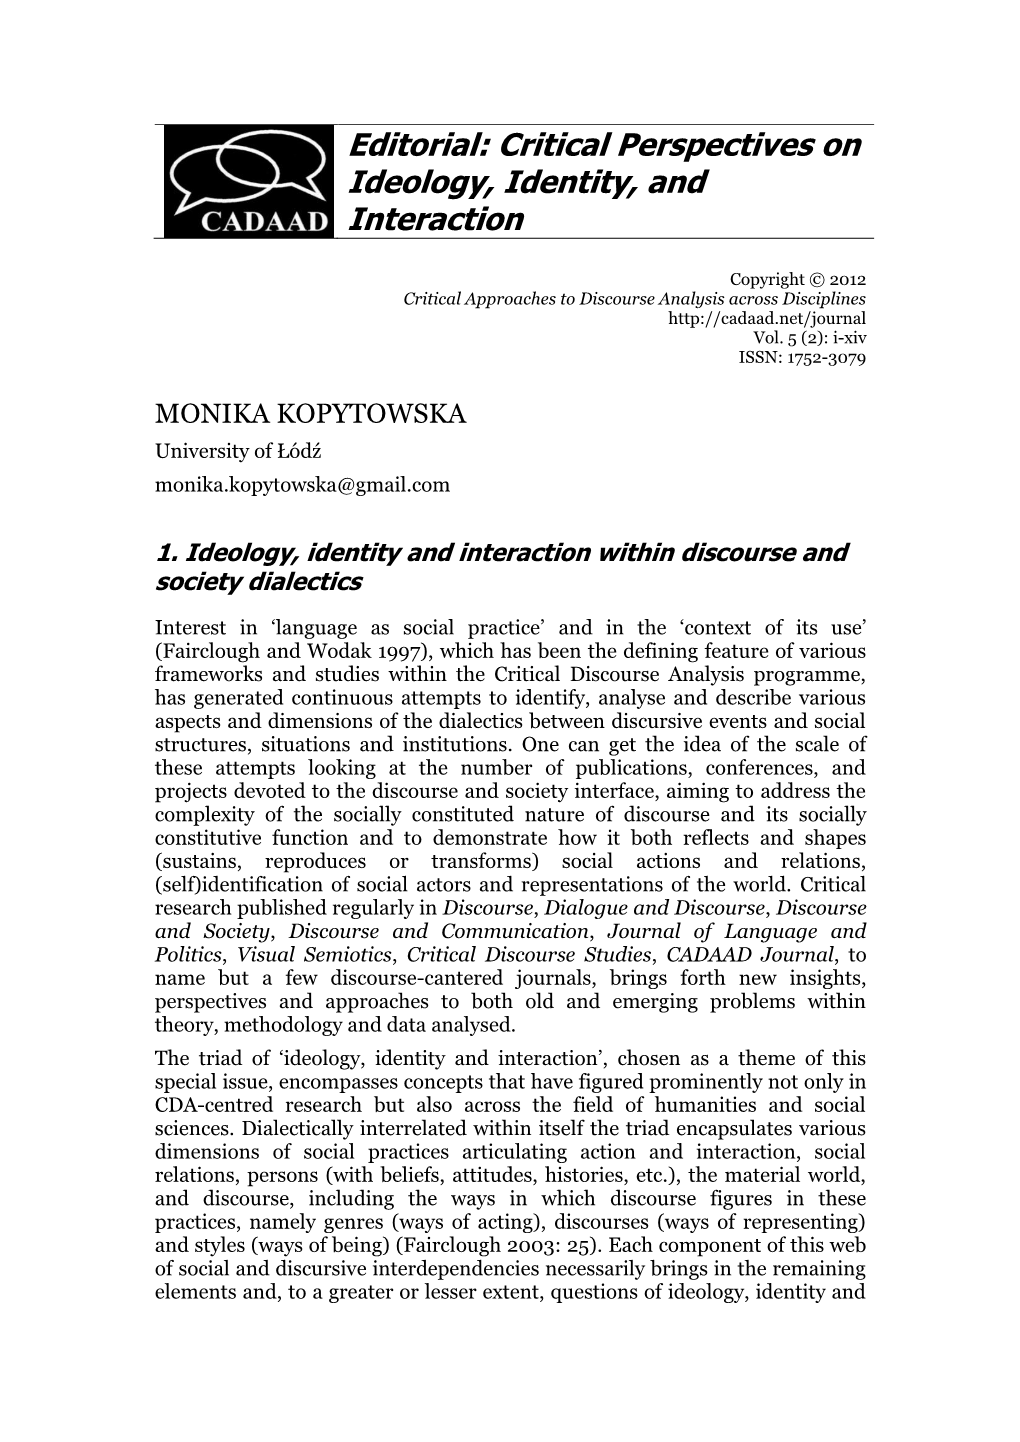 Editorial: Critical Perspectives on Ideology, Identity, and Interaction